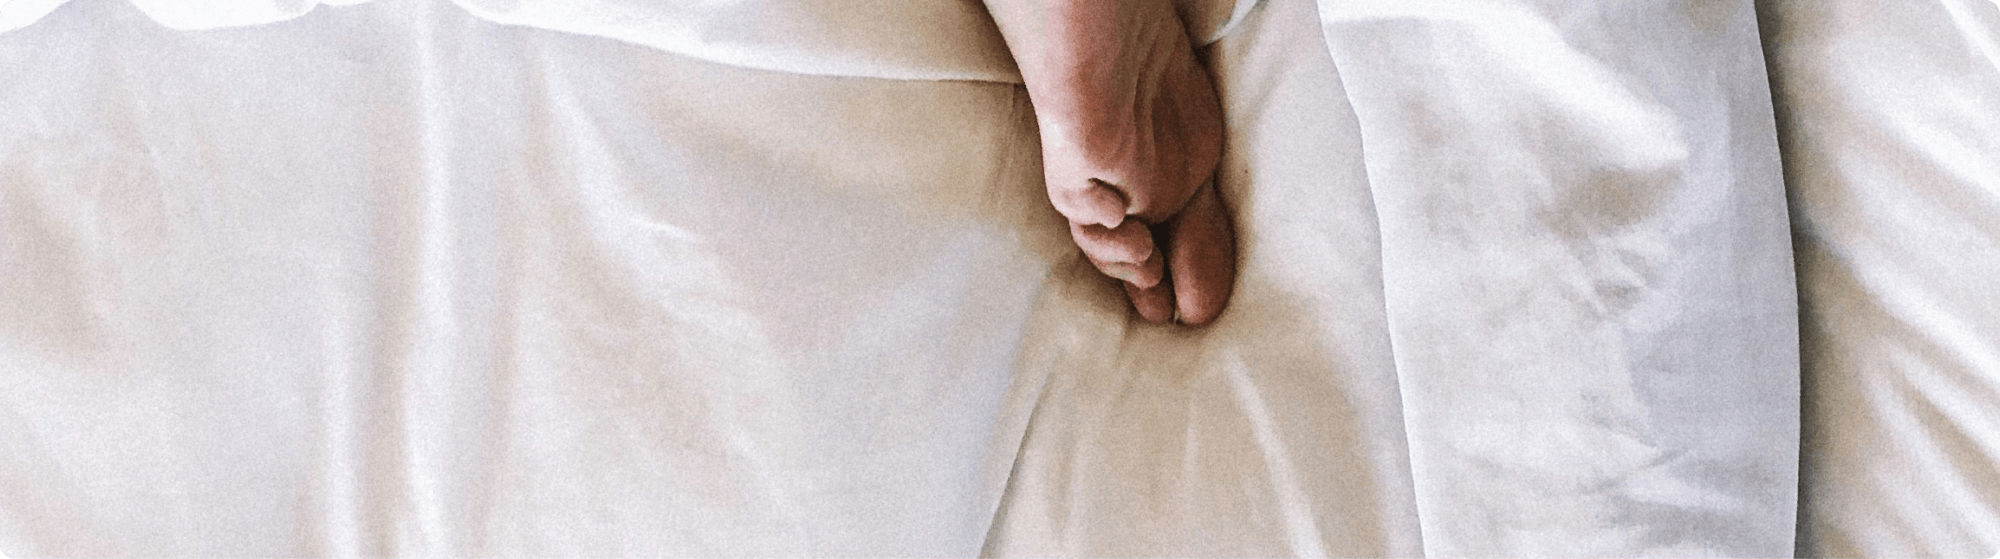 Foot of a sleeping person in bed